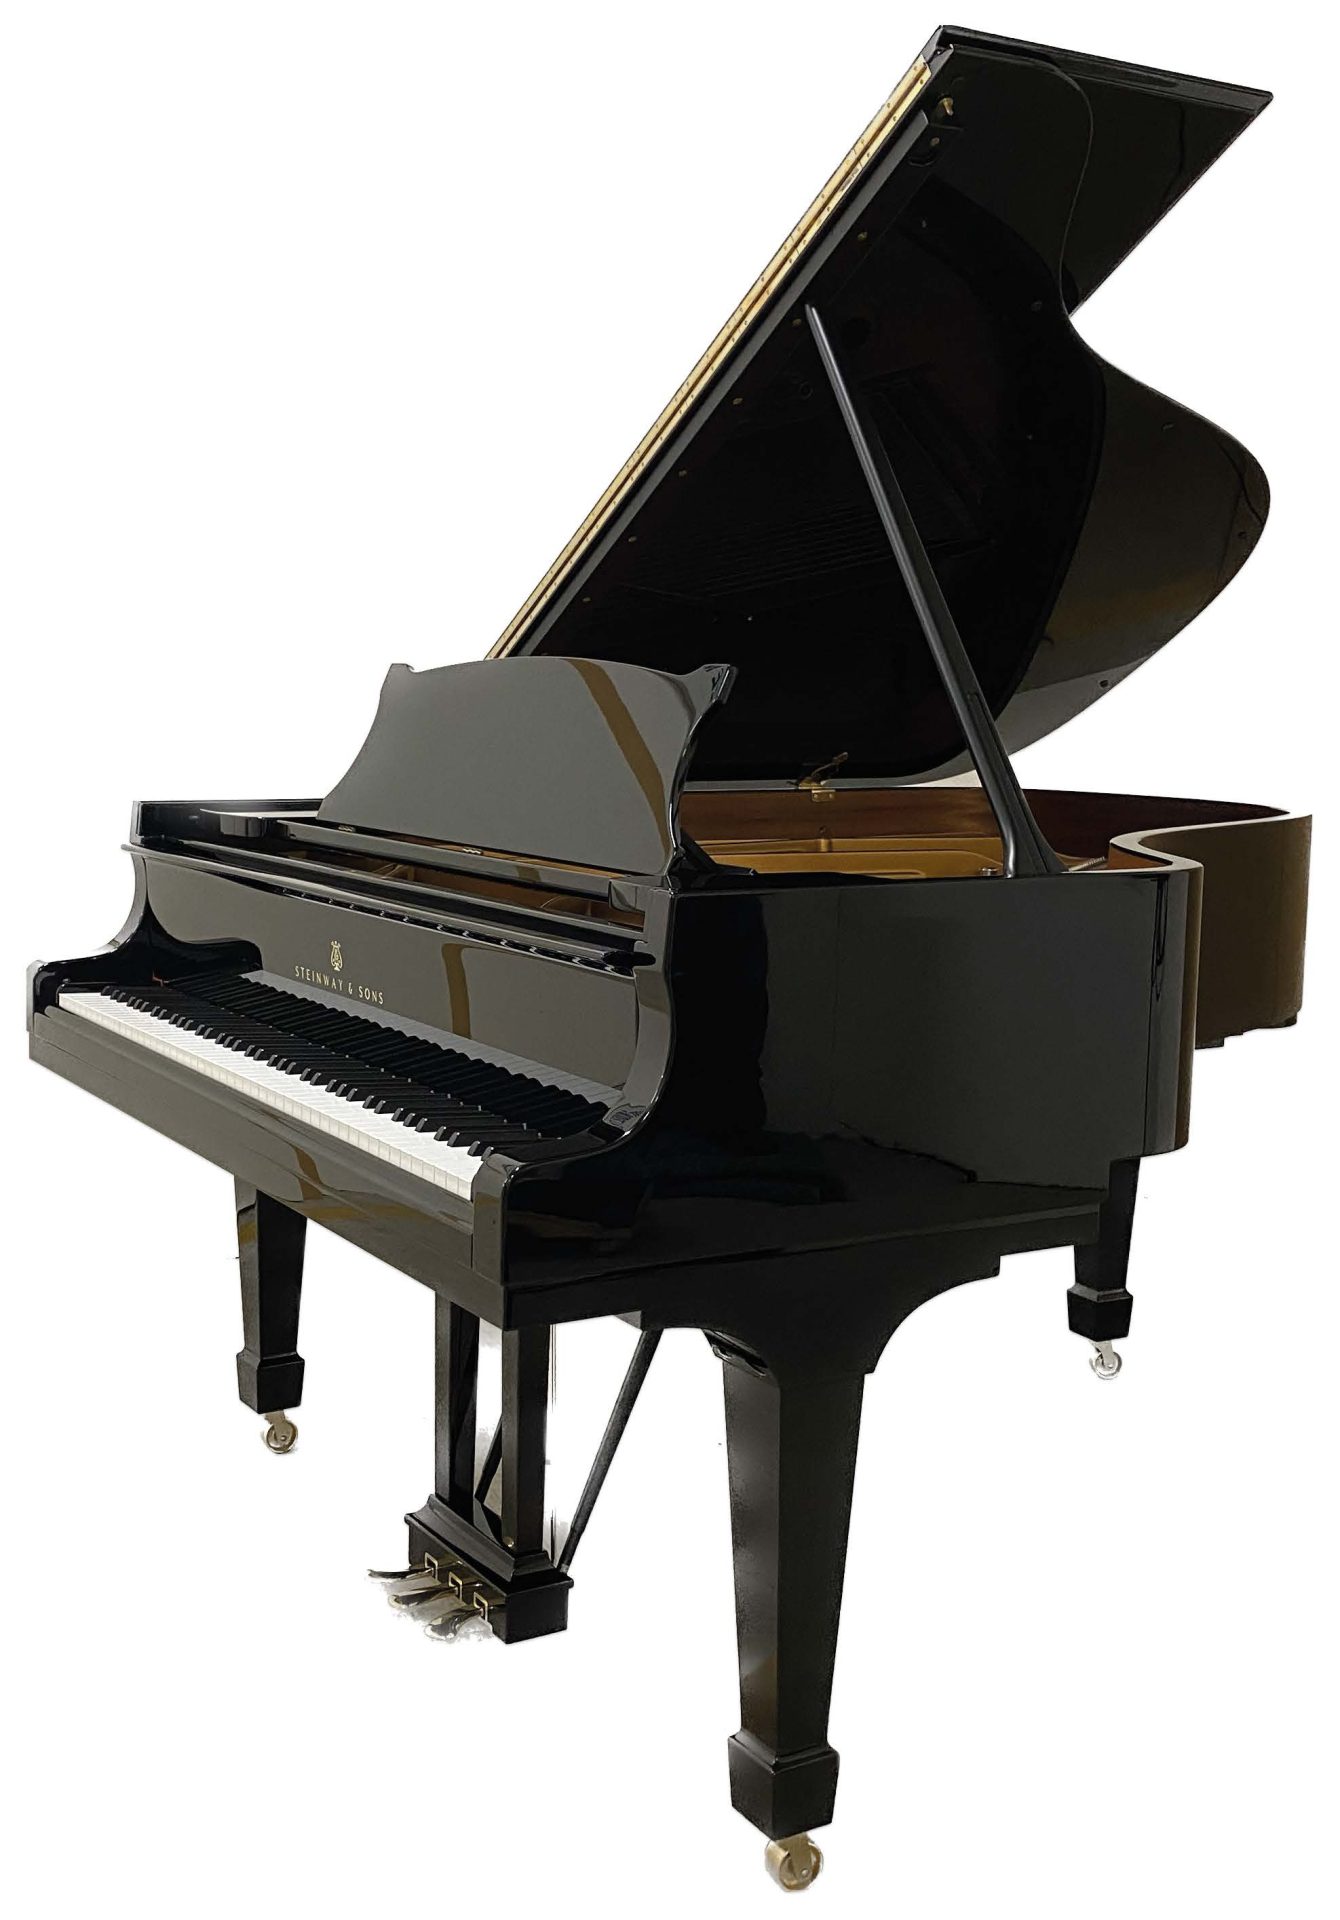 Steinway & Sons
A-188